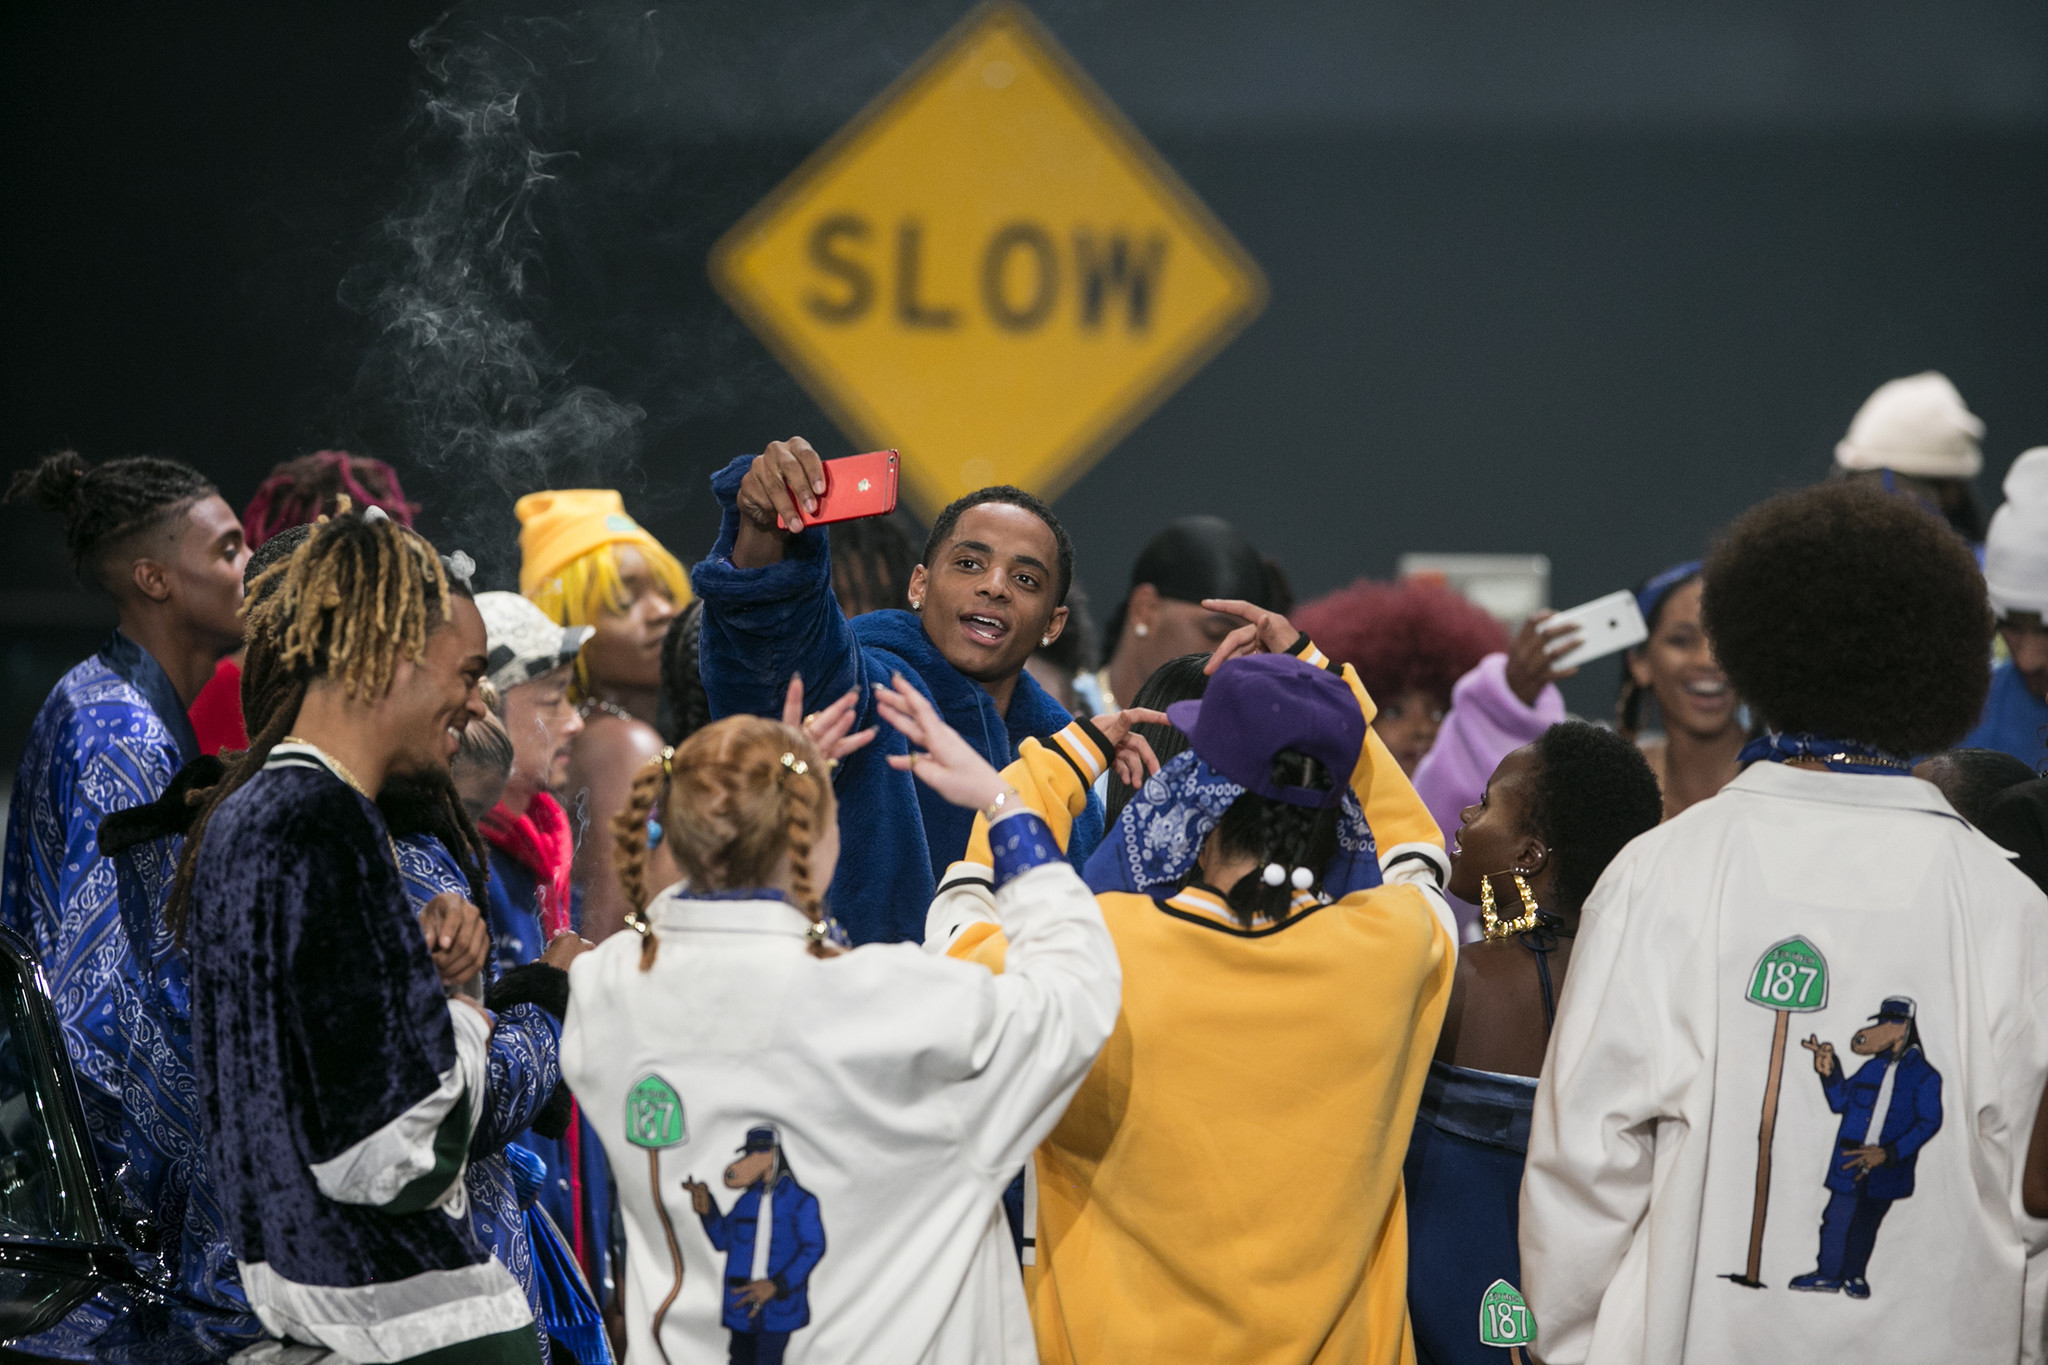 At Made LA, Snoop Dogg and Wiz Khalifa make the traditional runway show disappear in a ...2048 x 1365